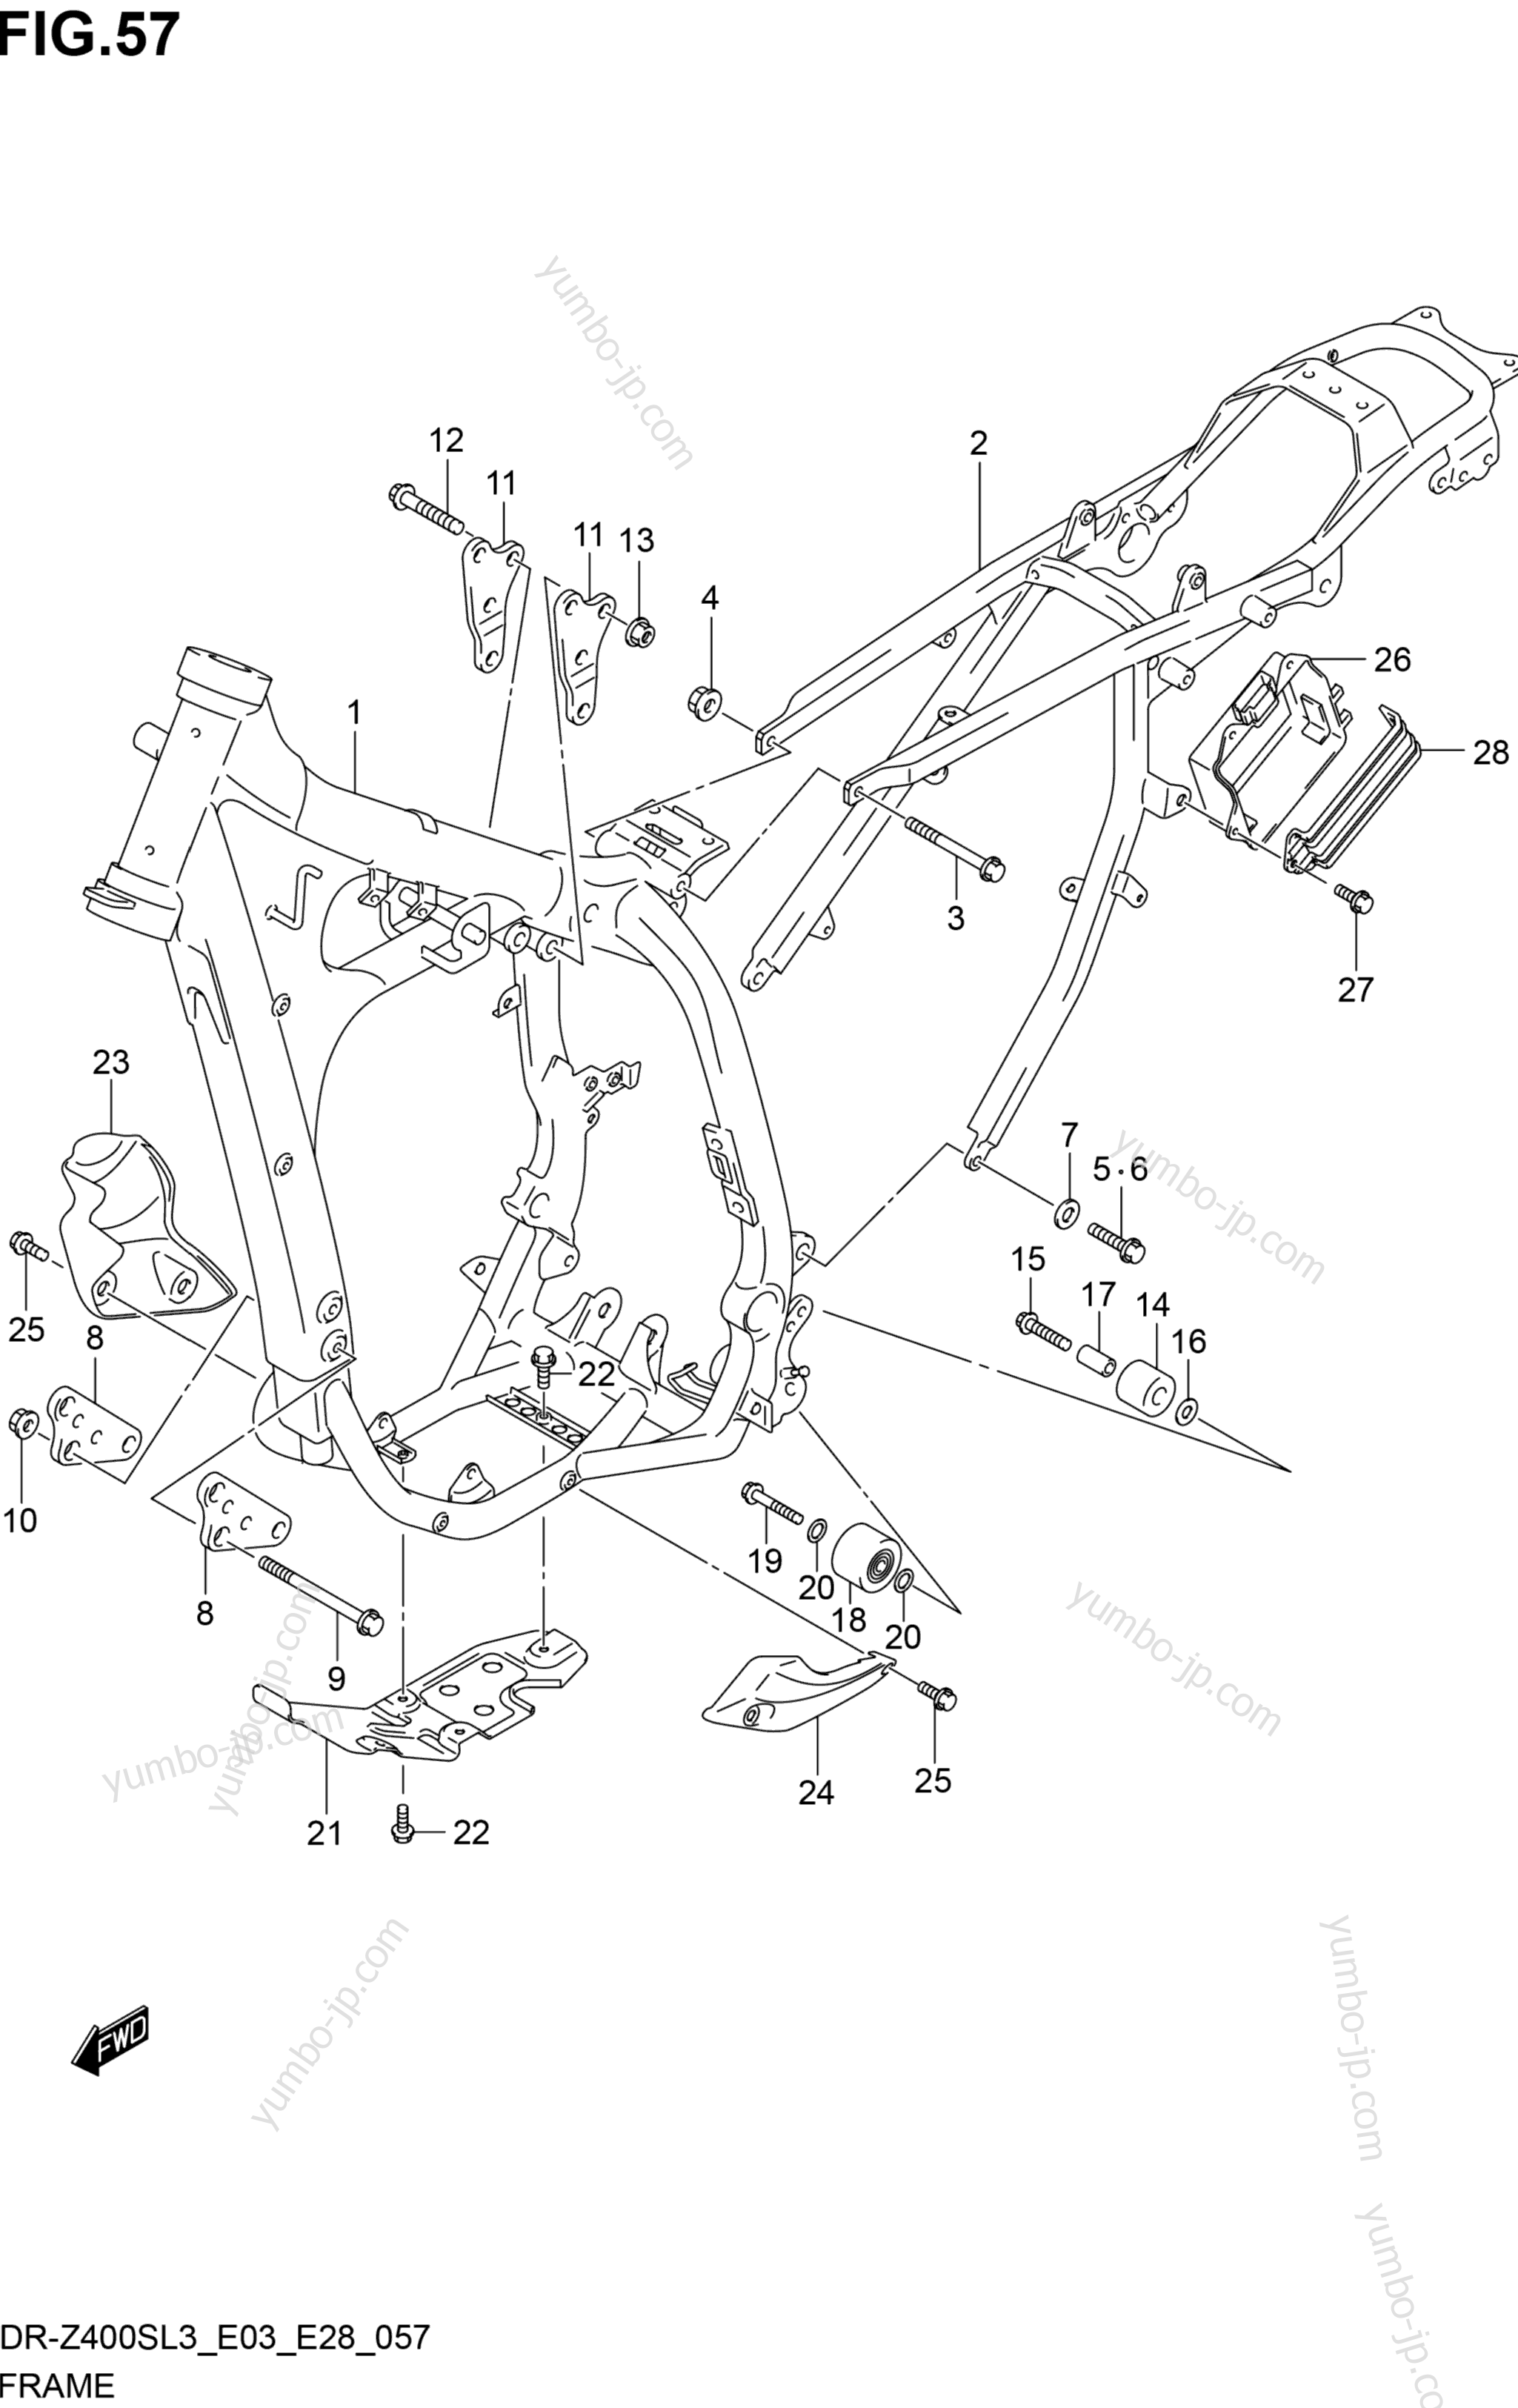 FRAME (DR-Z400SL3 E33) for motorcycles SUZUKI DR-Z400S 2013 year